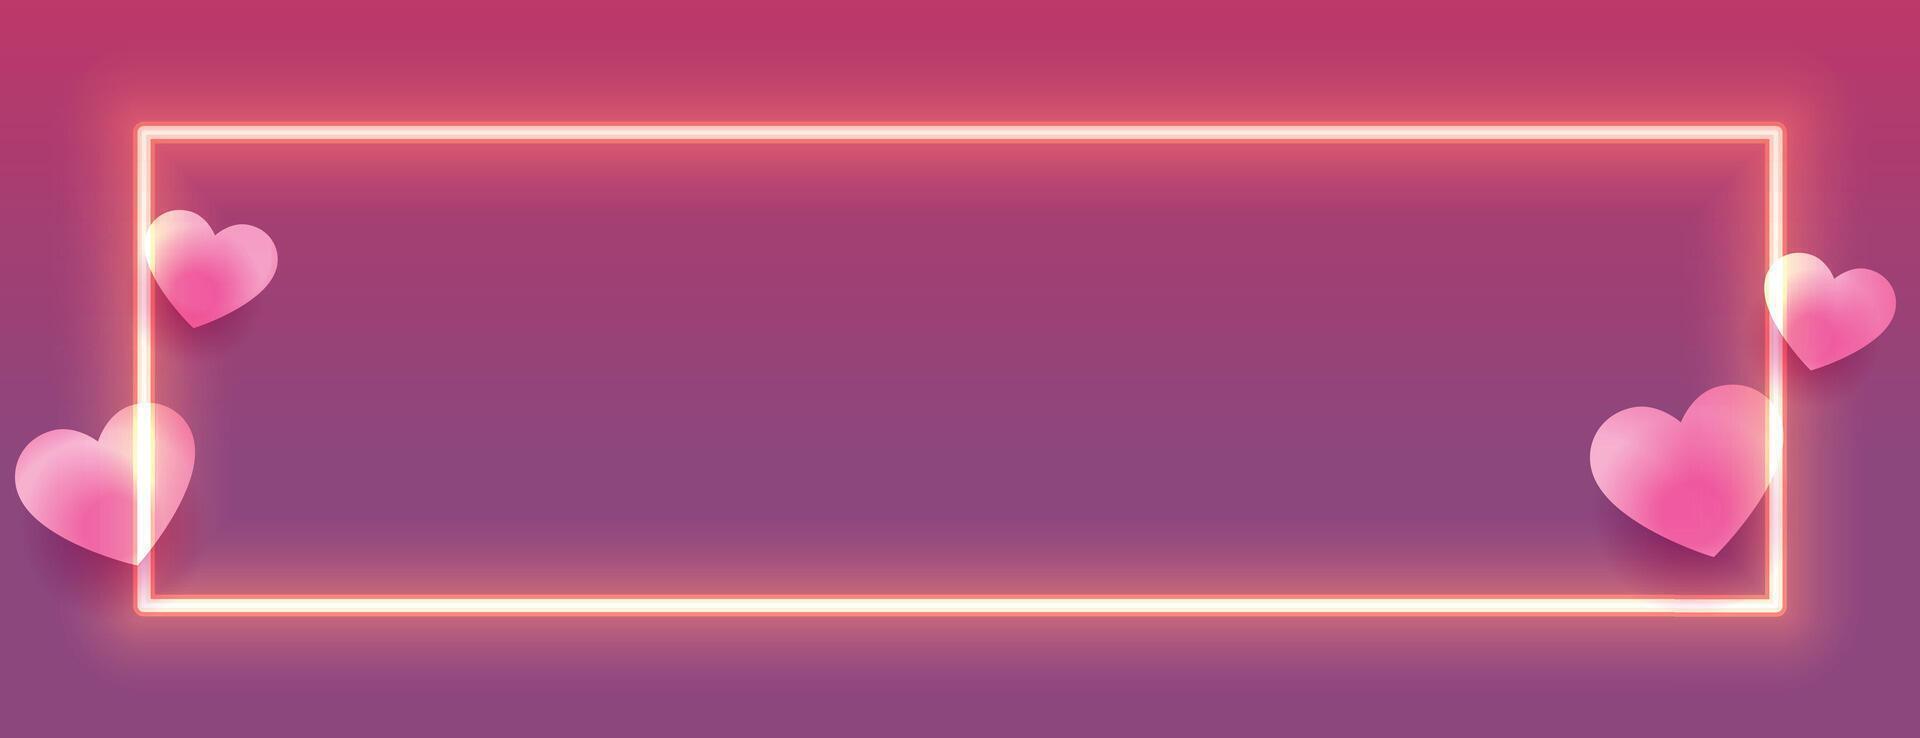 hearts on neon frame valentines day banner with text space vector